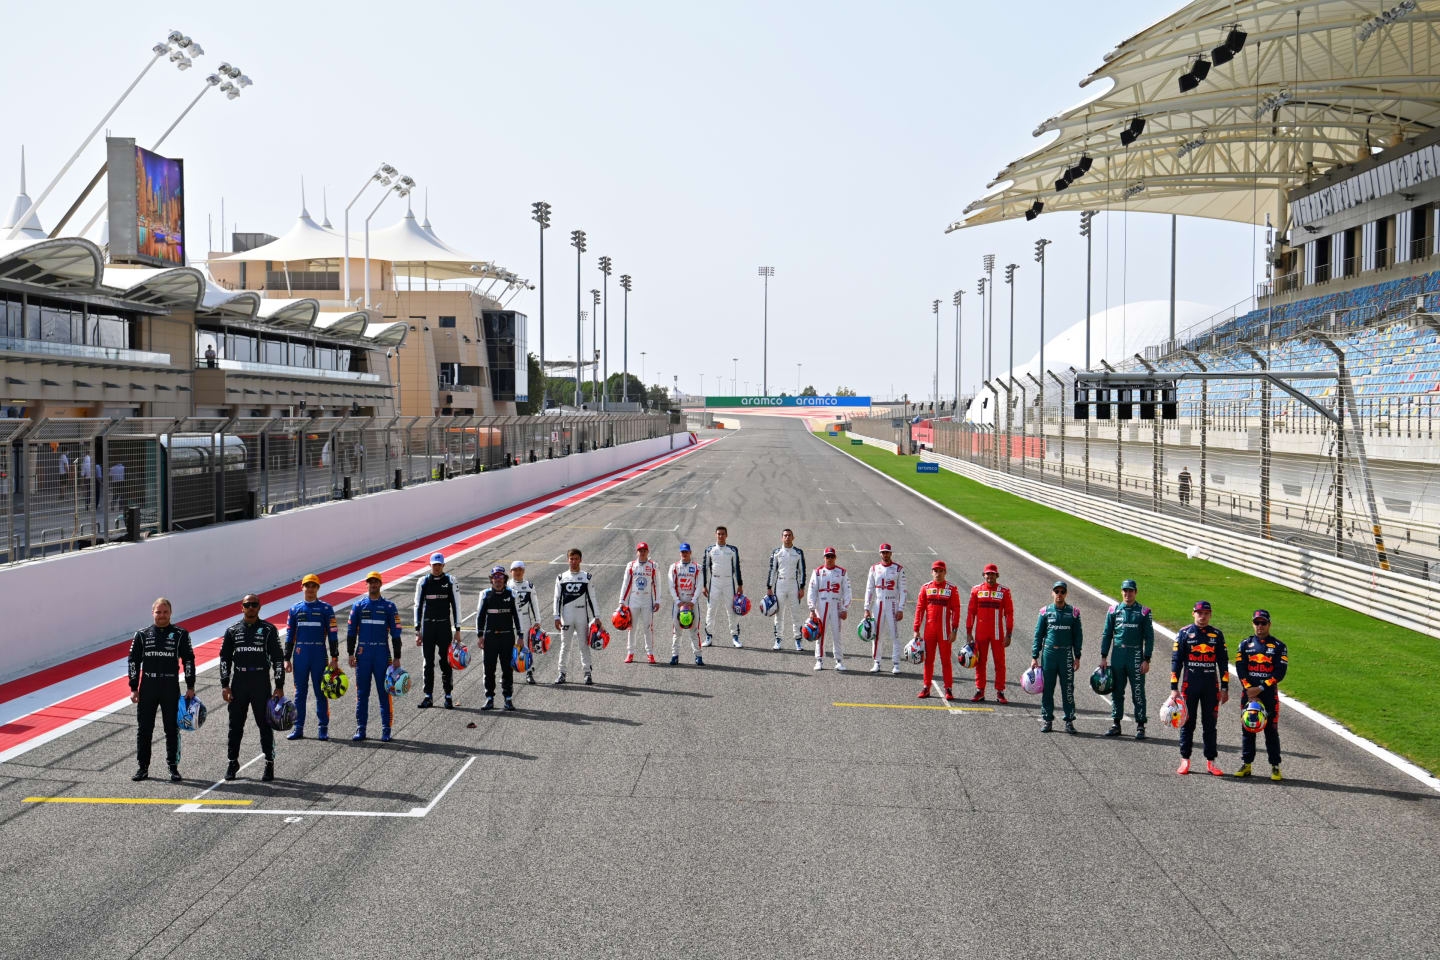 BAHRAIN, BAHRAIN - MARCH 12: The F1 drivers stand on the grid during Day One of F1 Testing at